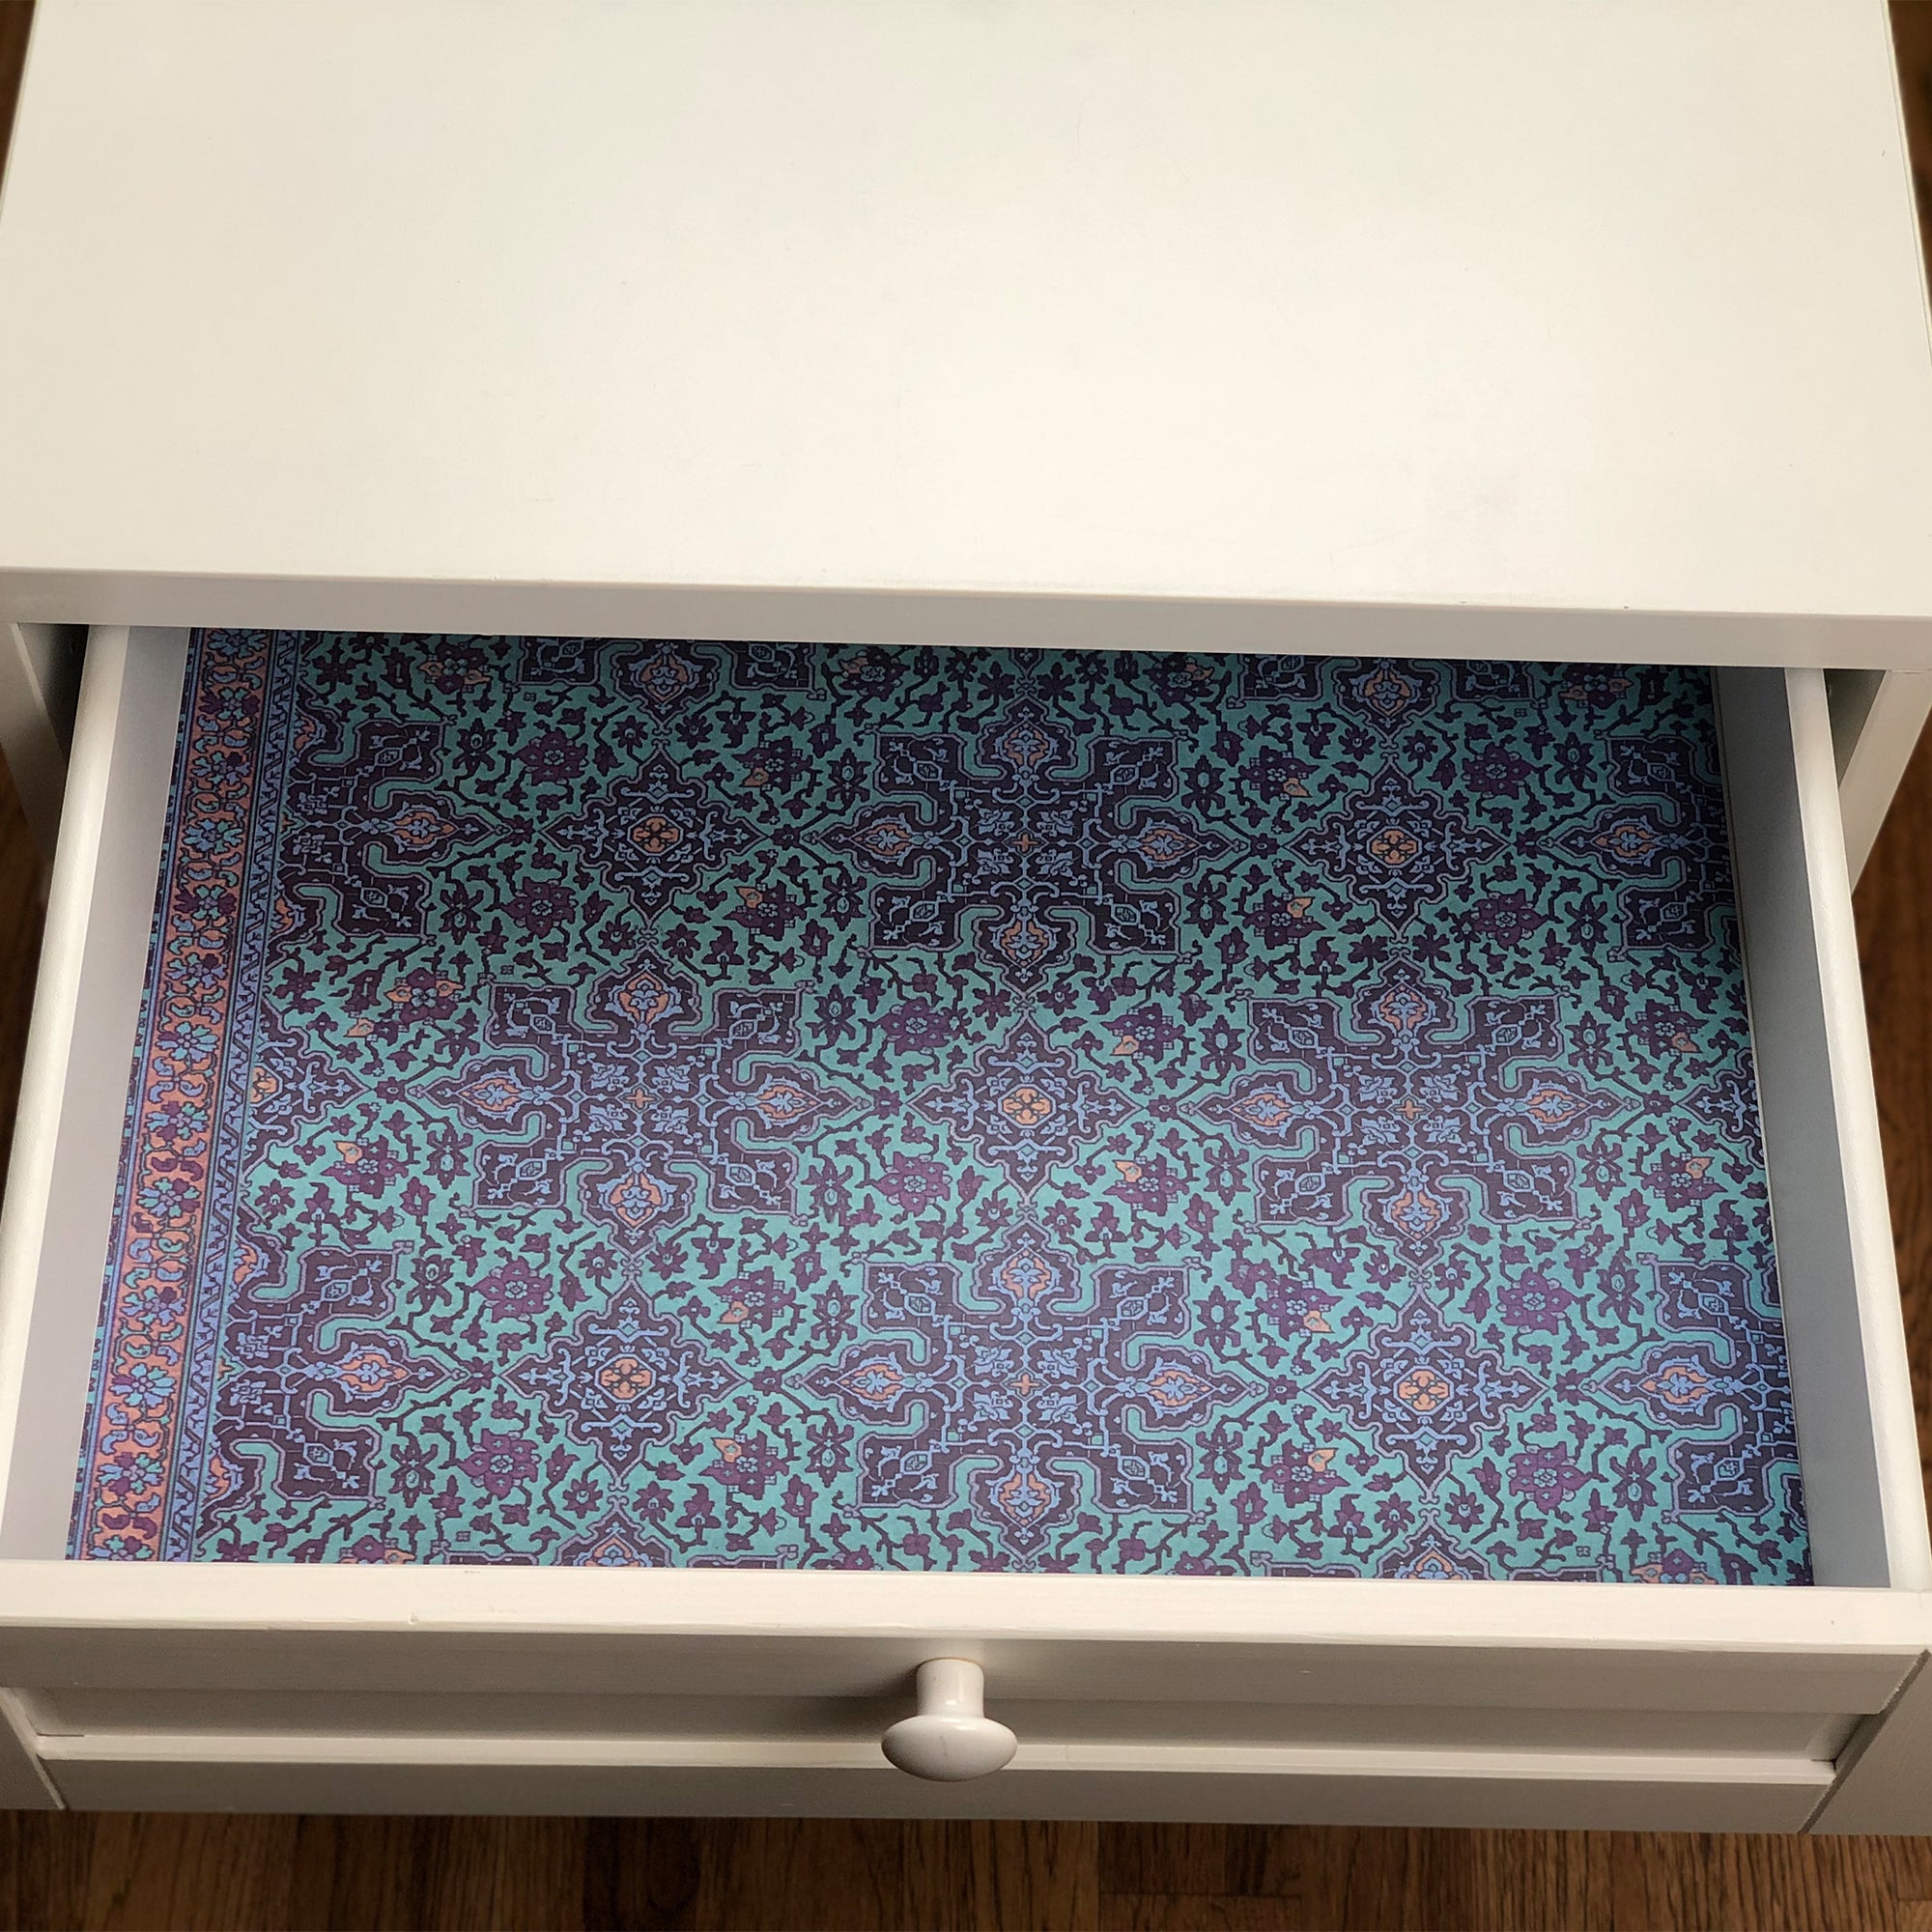 Scentennials Lavender Scented Drawer Liners - 6 Sheets